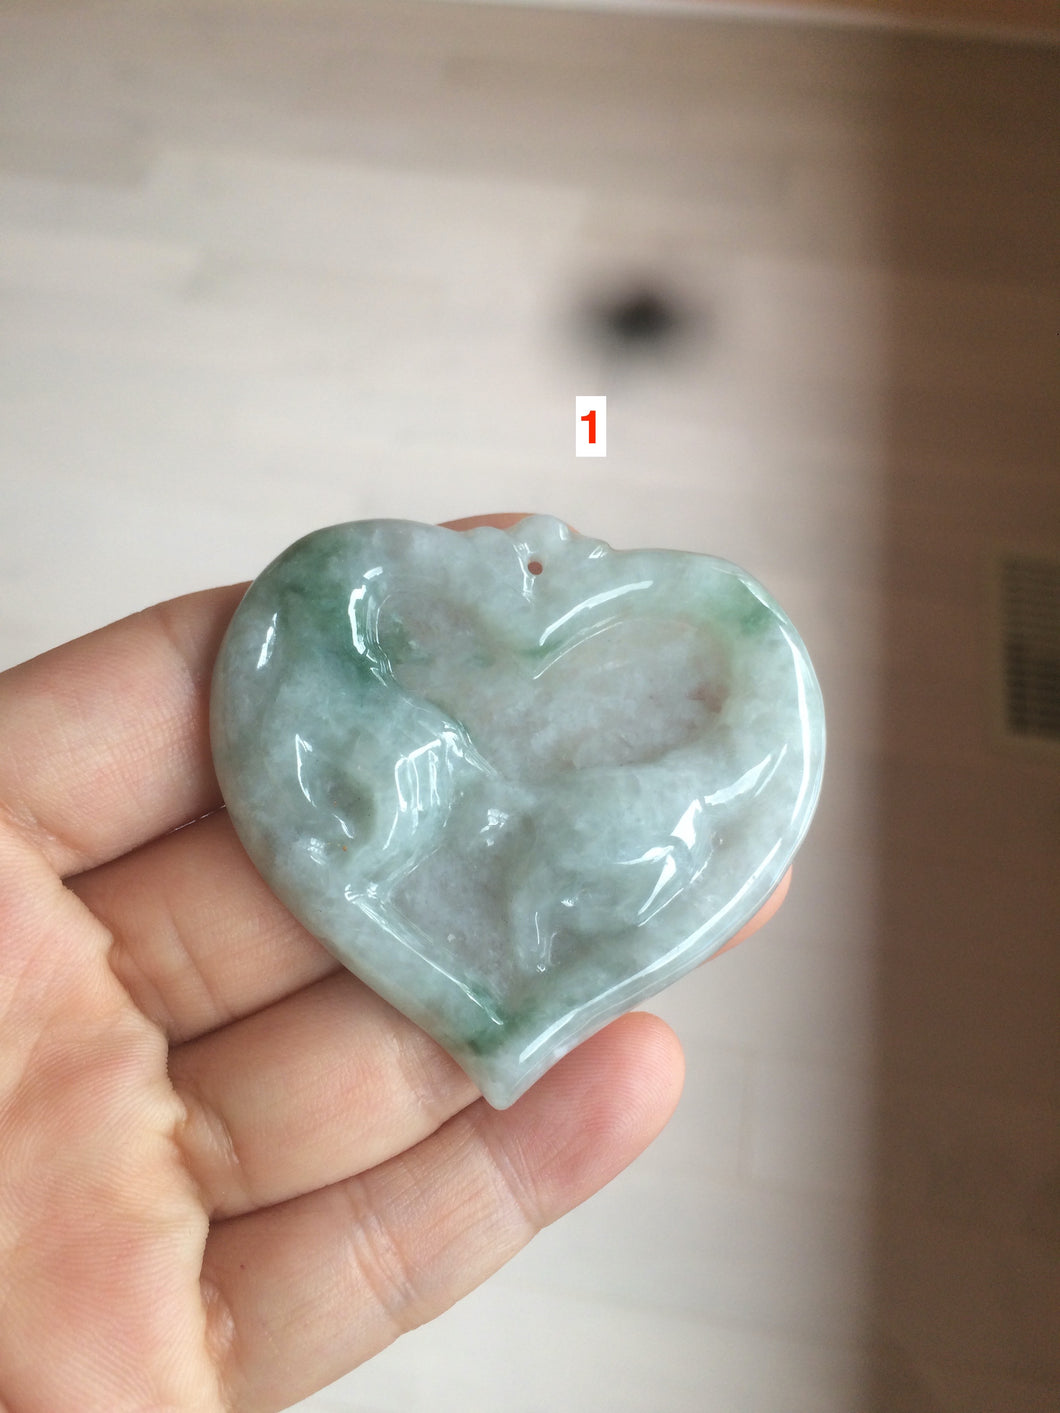 100% Natural type A light green/white concentric hearts/pinky promise(执子之手，与子偕老) jadeite Jade pendant necklace AZ74